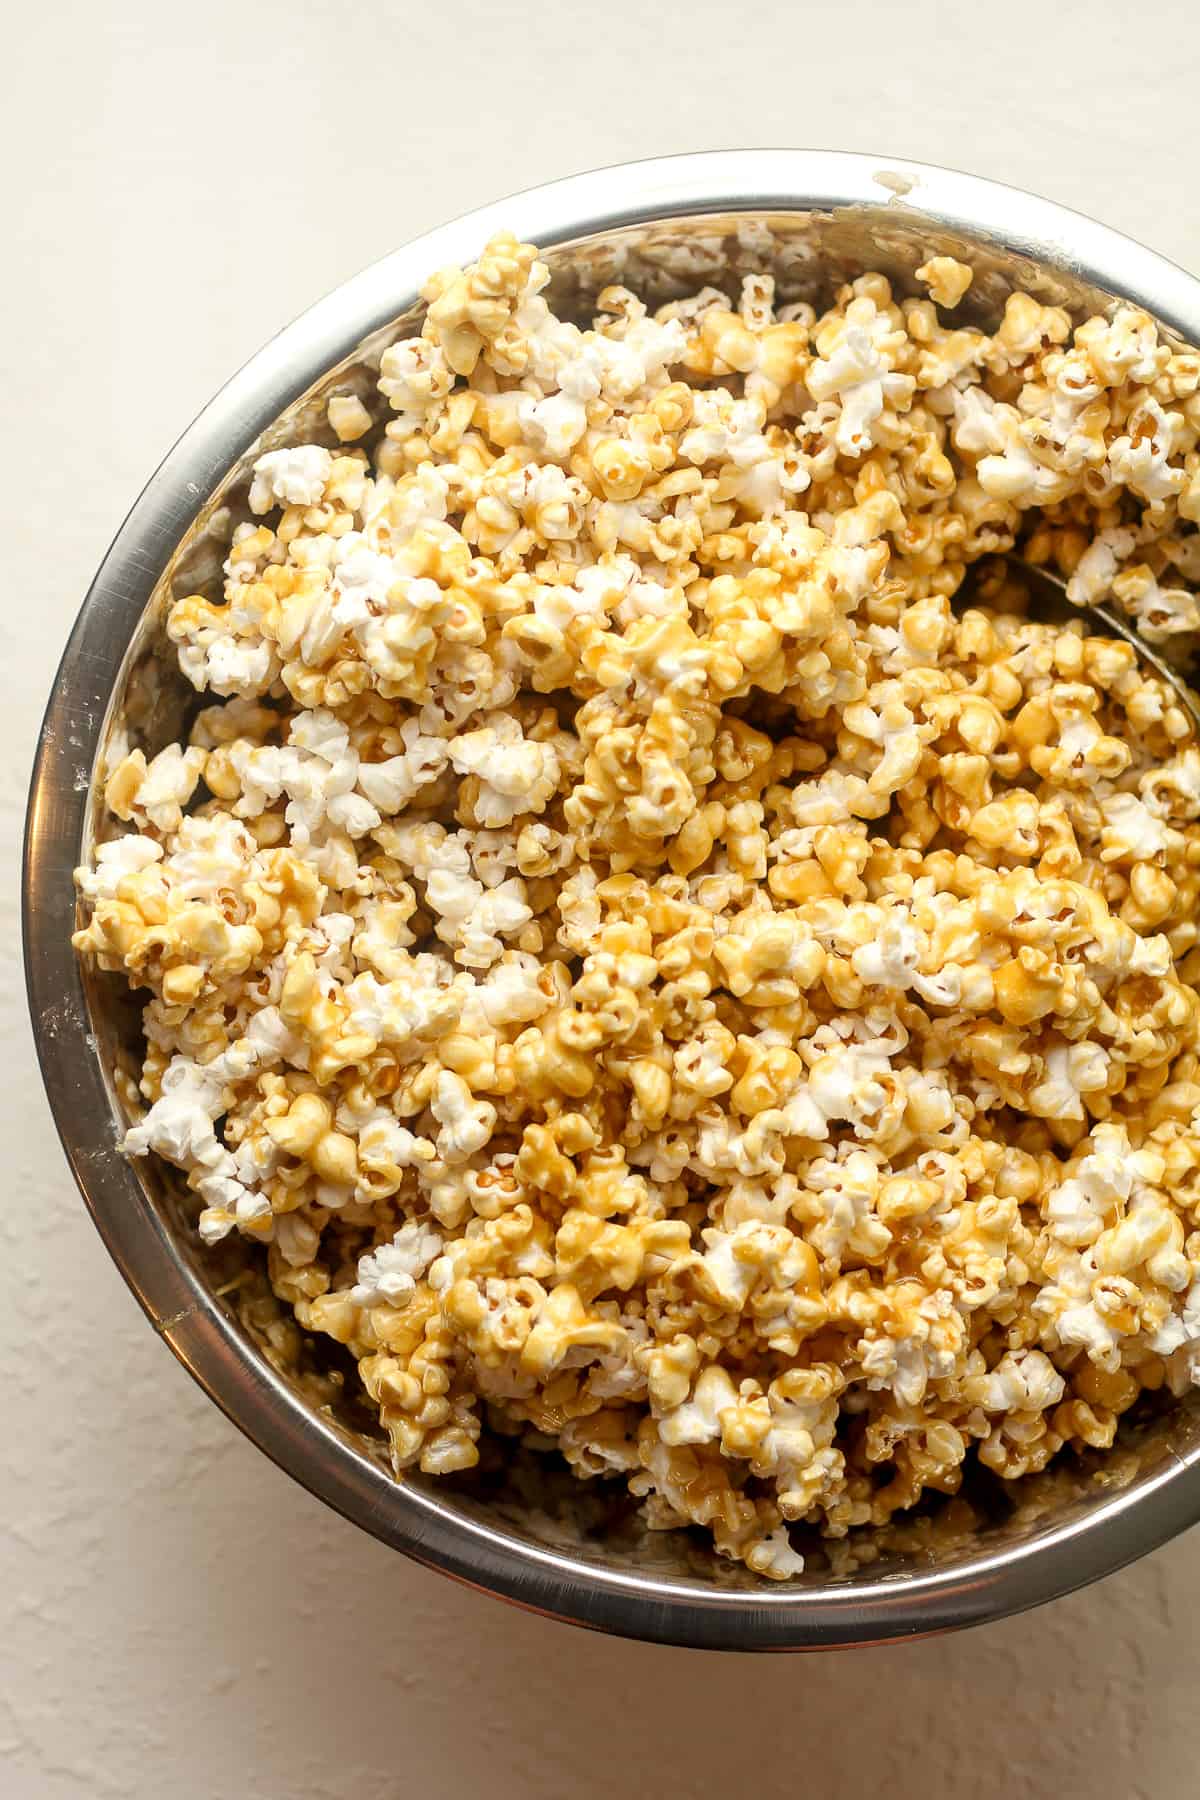 A bowl of the popcorn plus the caramel mixture.